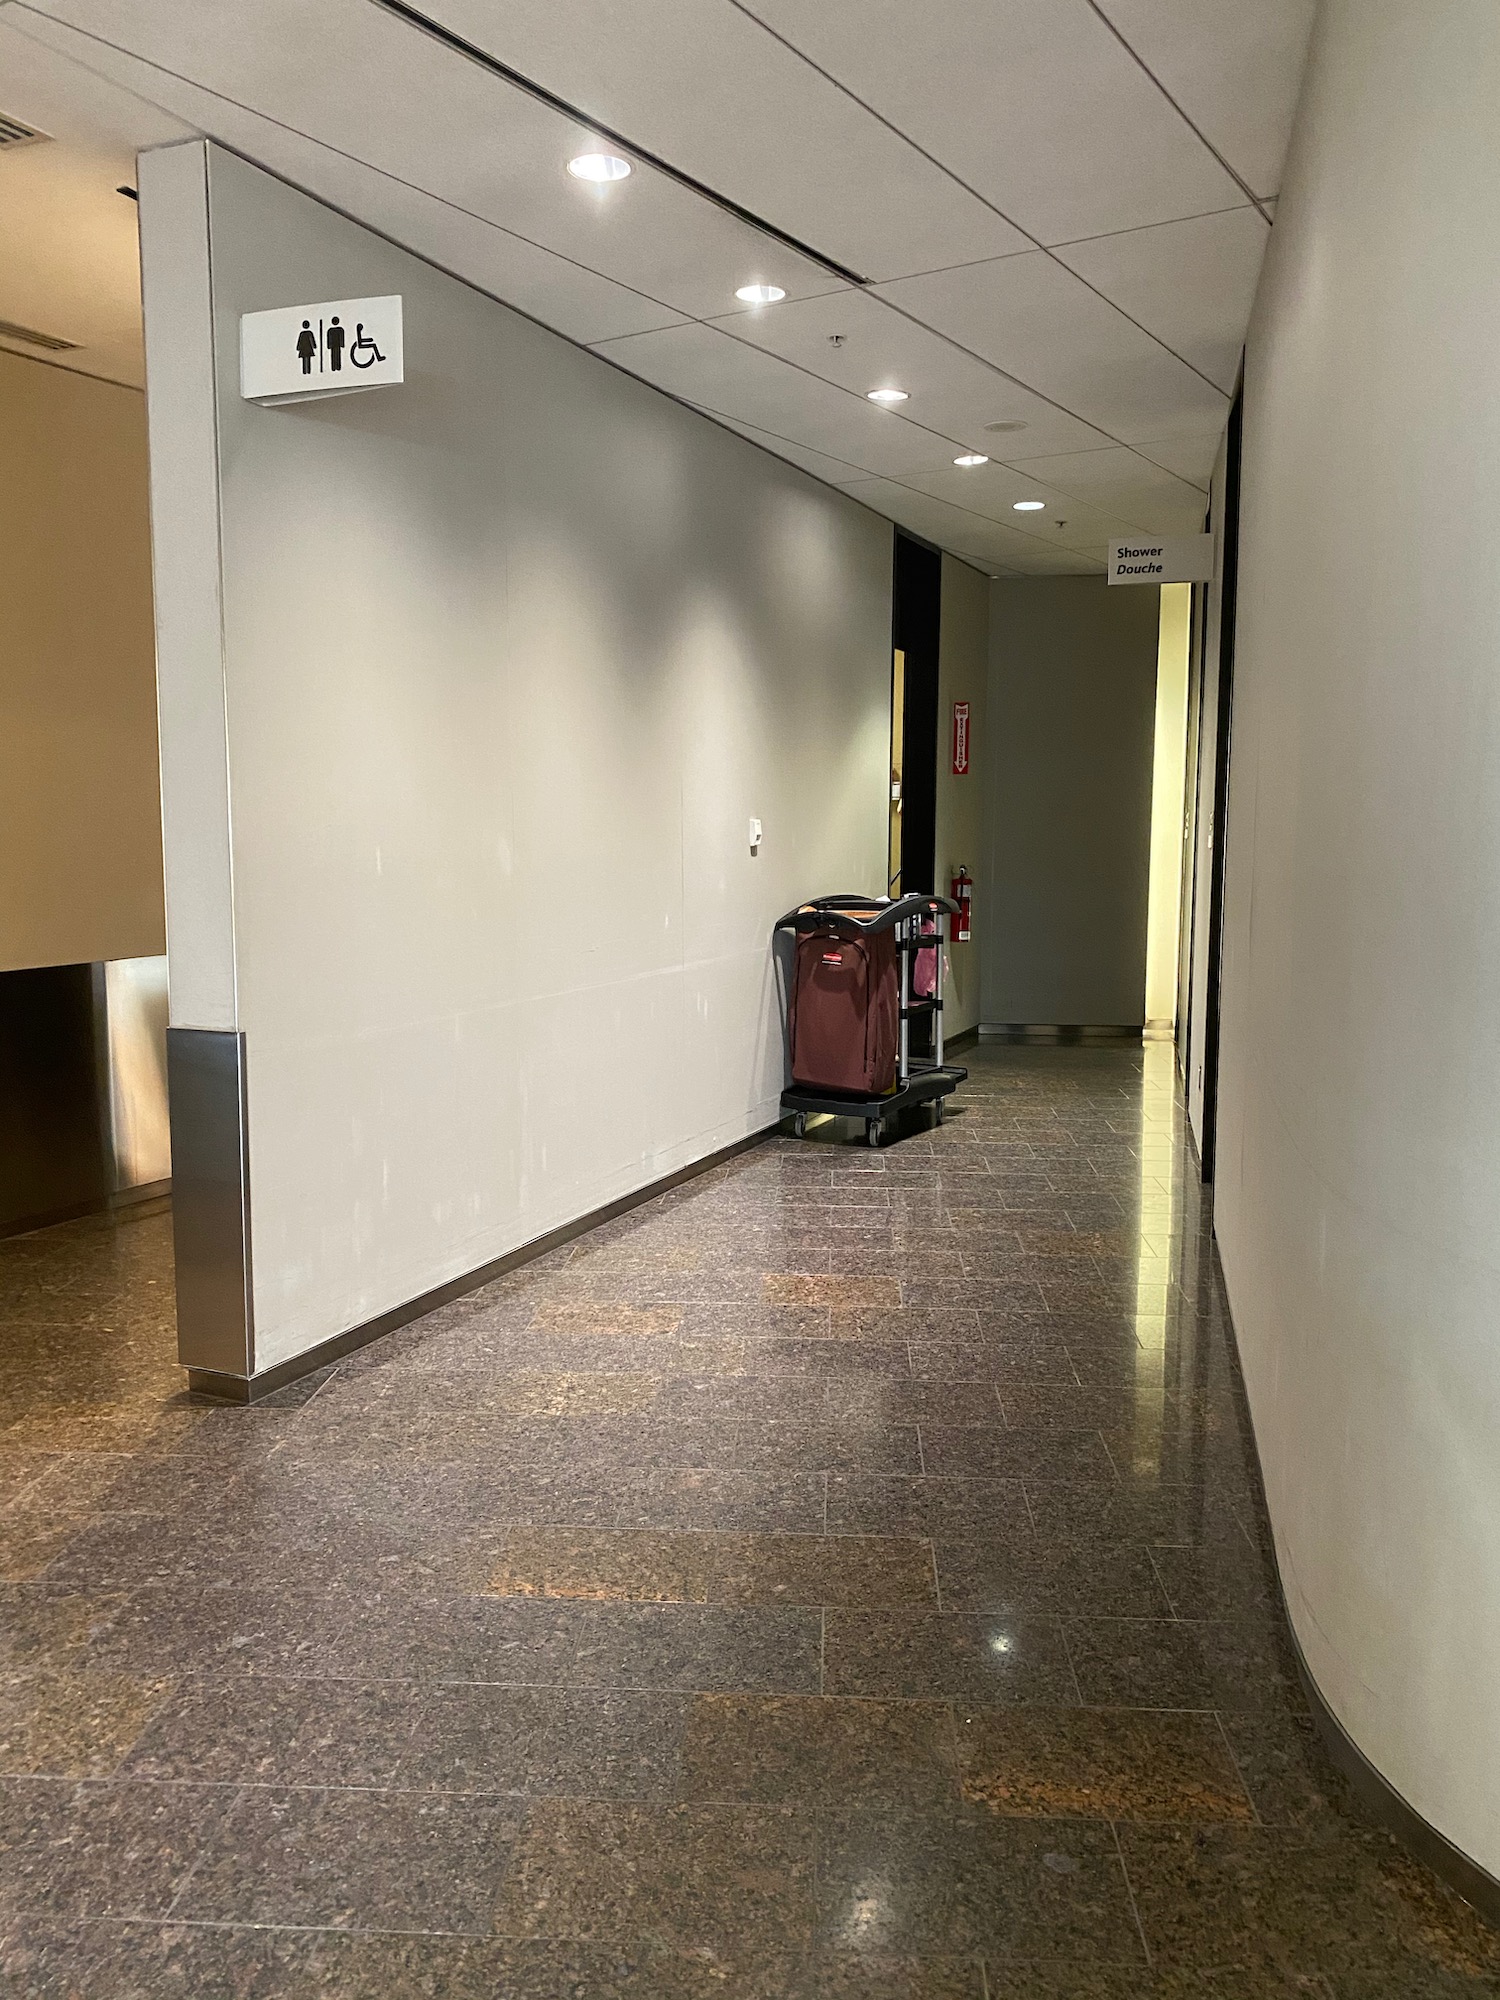 Air Canada Transborder Maple Leaf Lounge Toronto Review